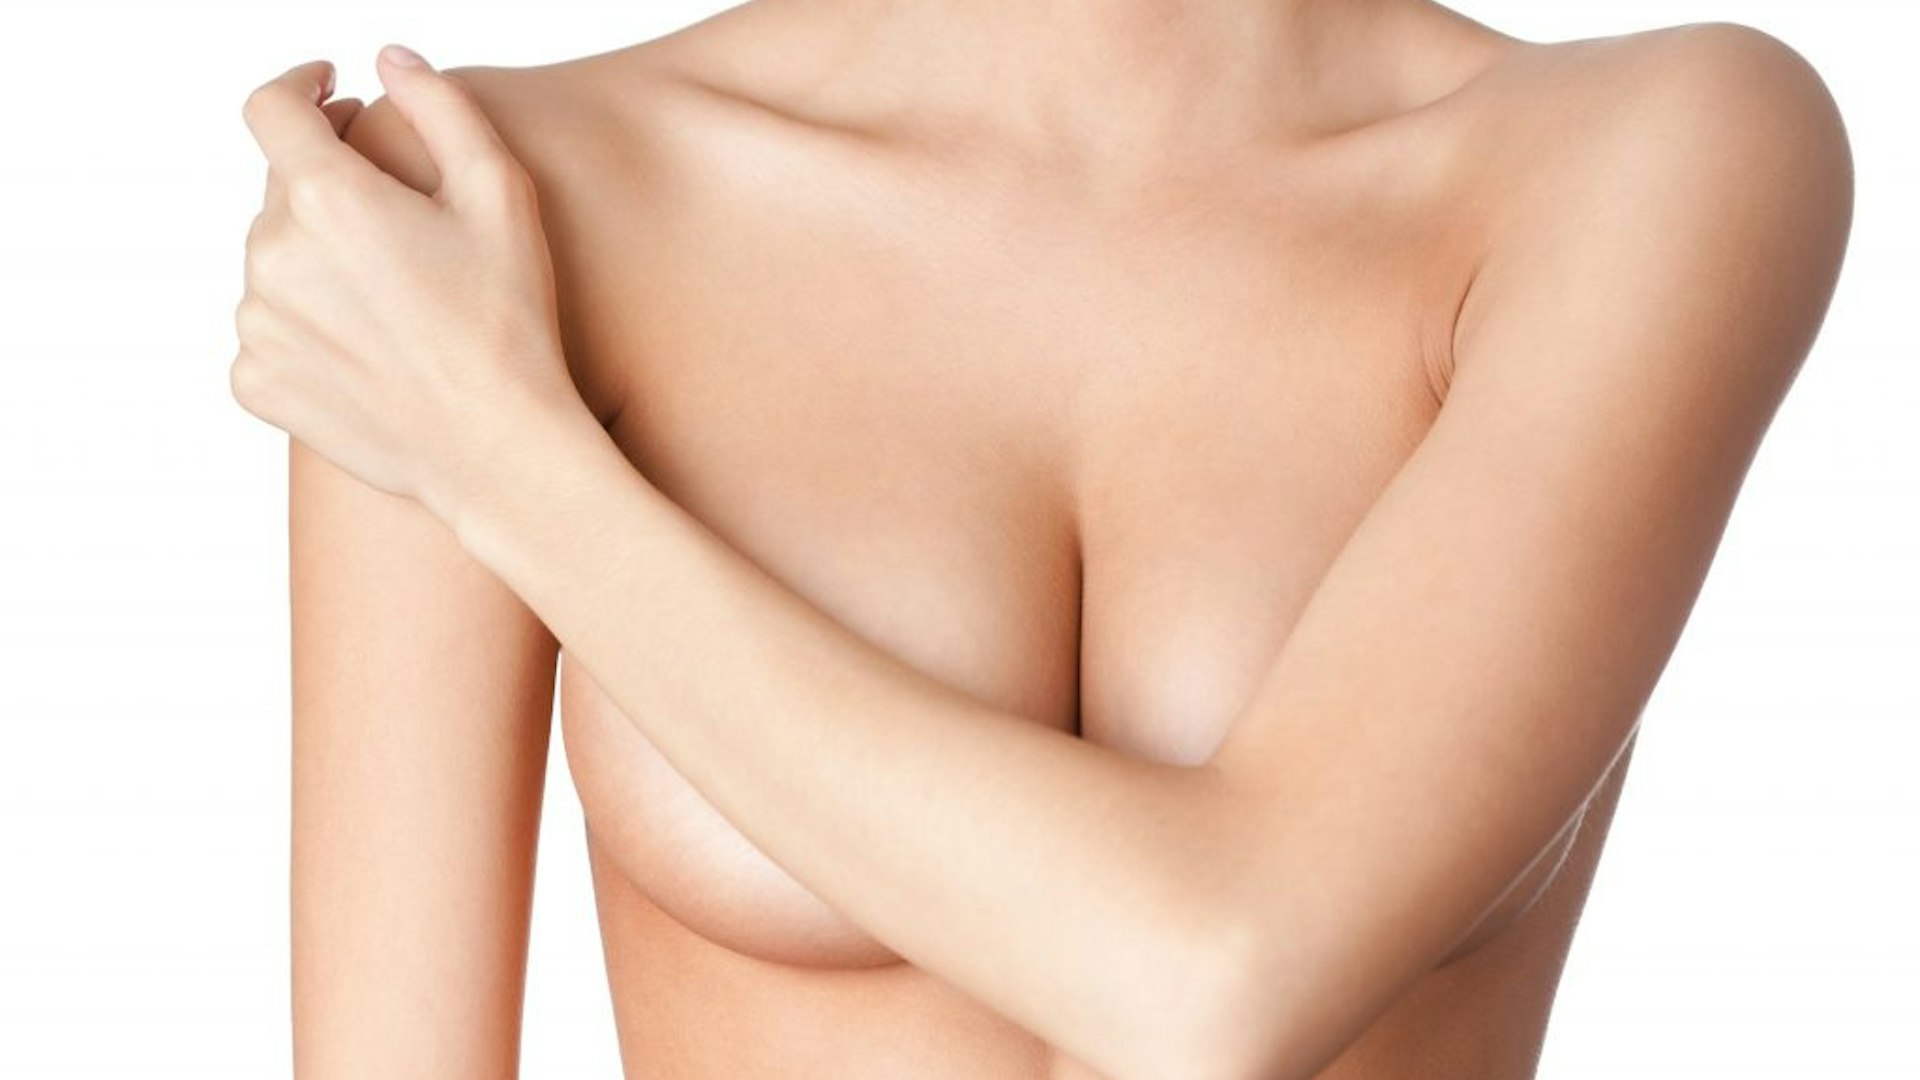 Woman with no top on covering her breasts